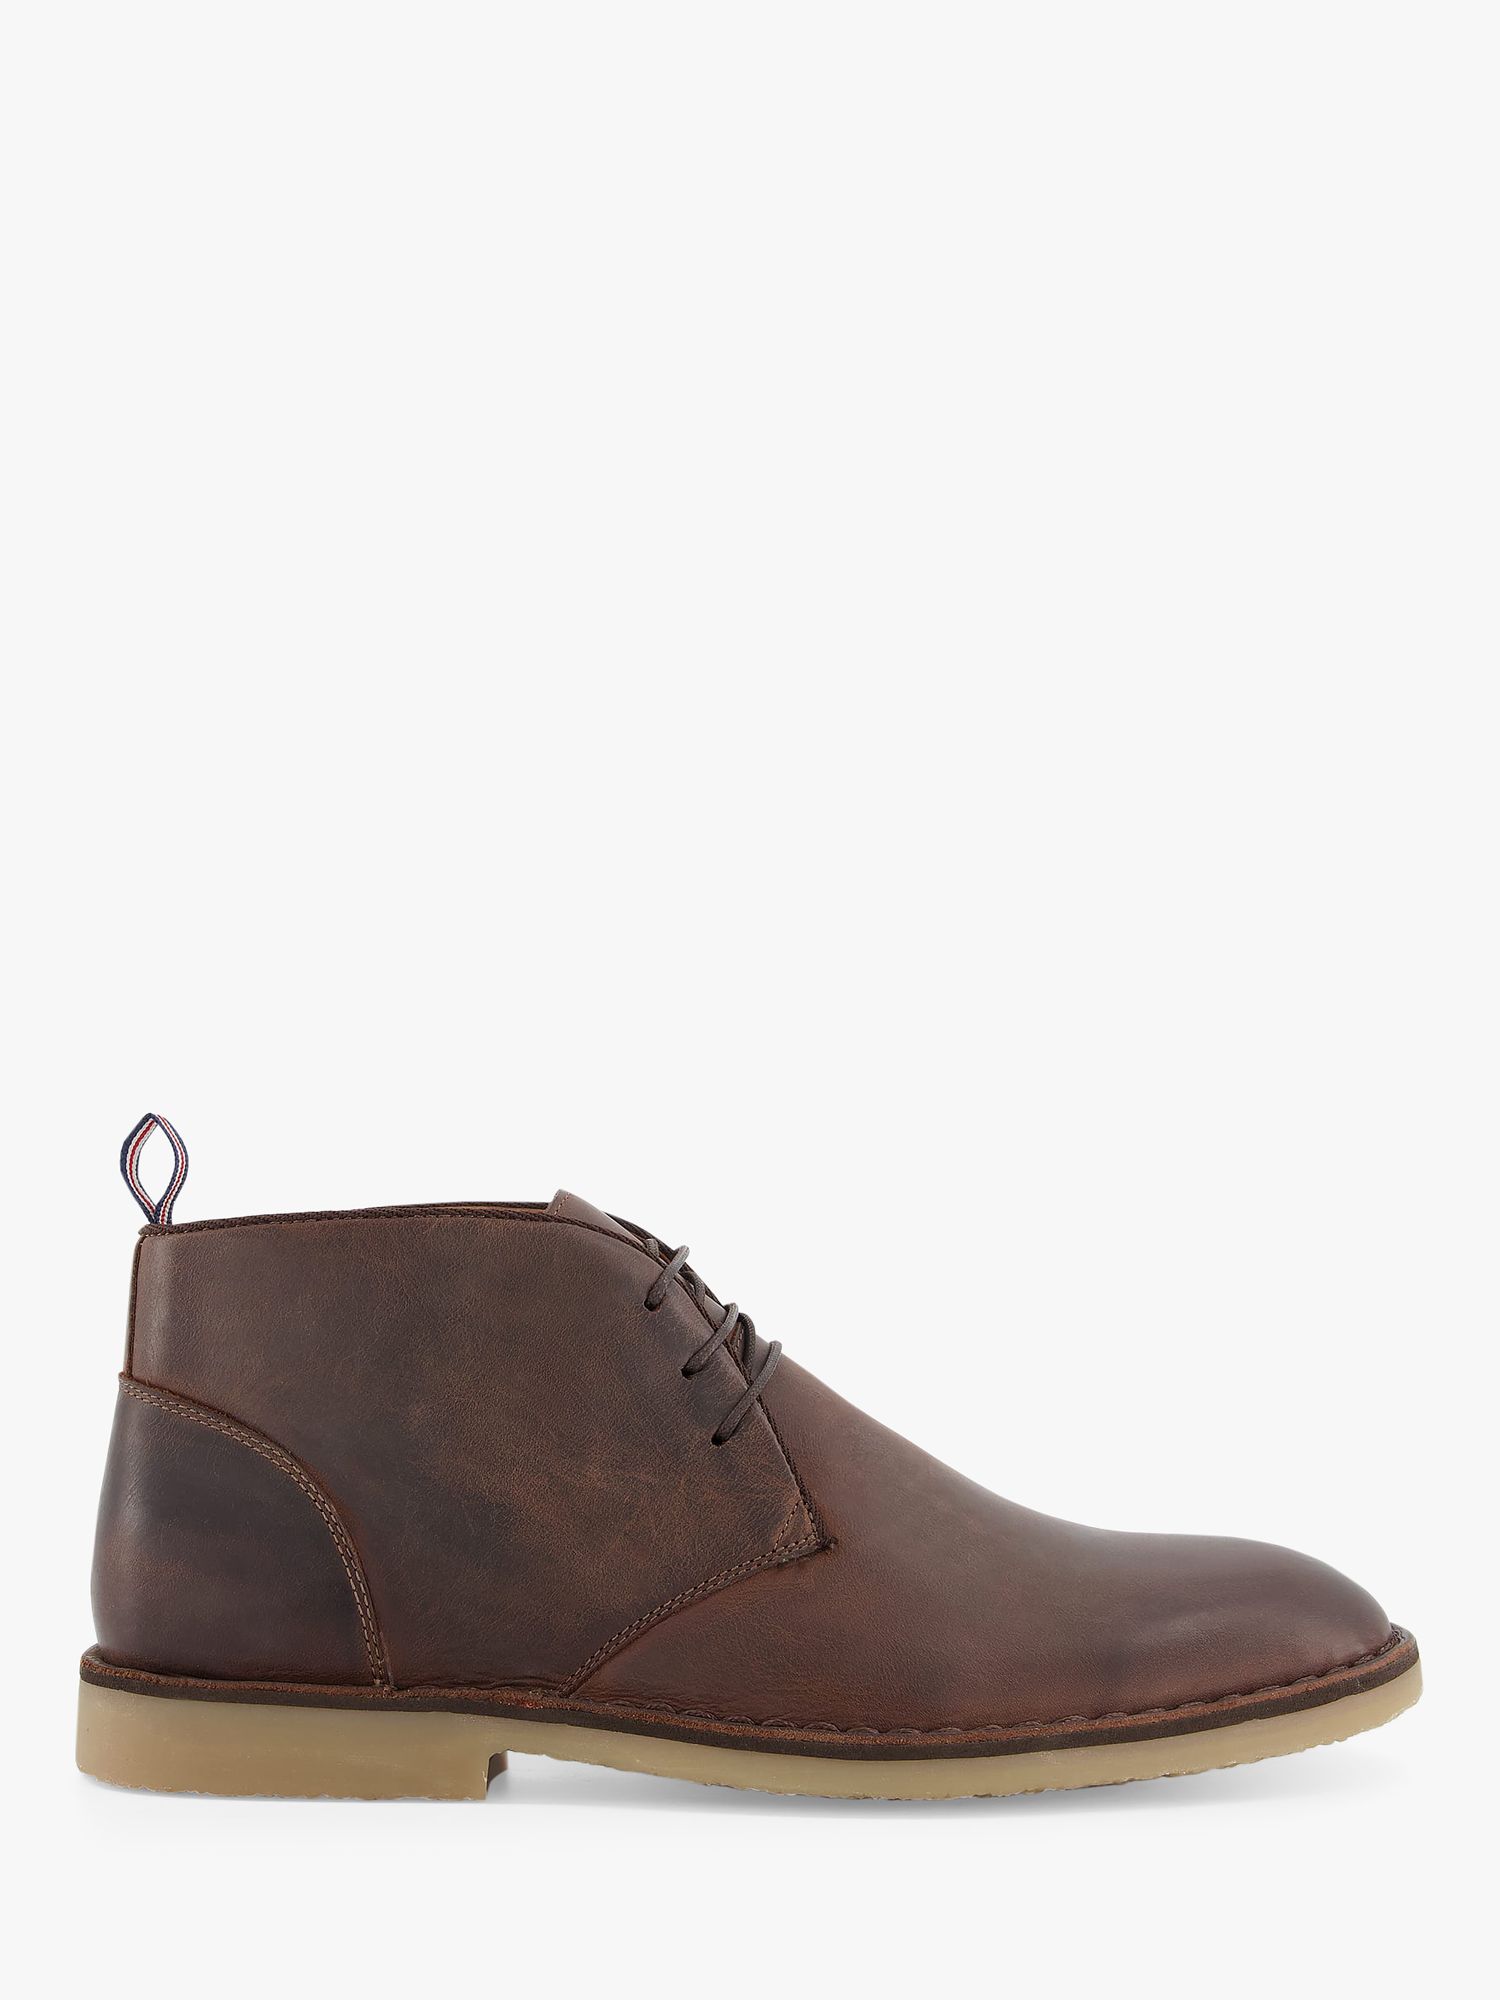 Dune Cash Leather Chukka Boots, Brown at John Lewis & Partners